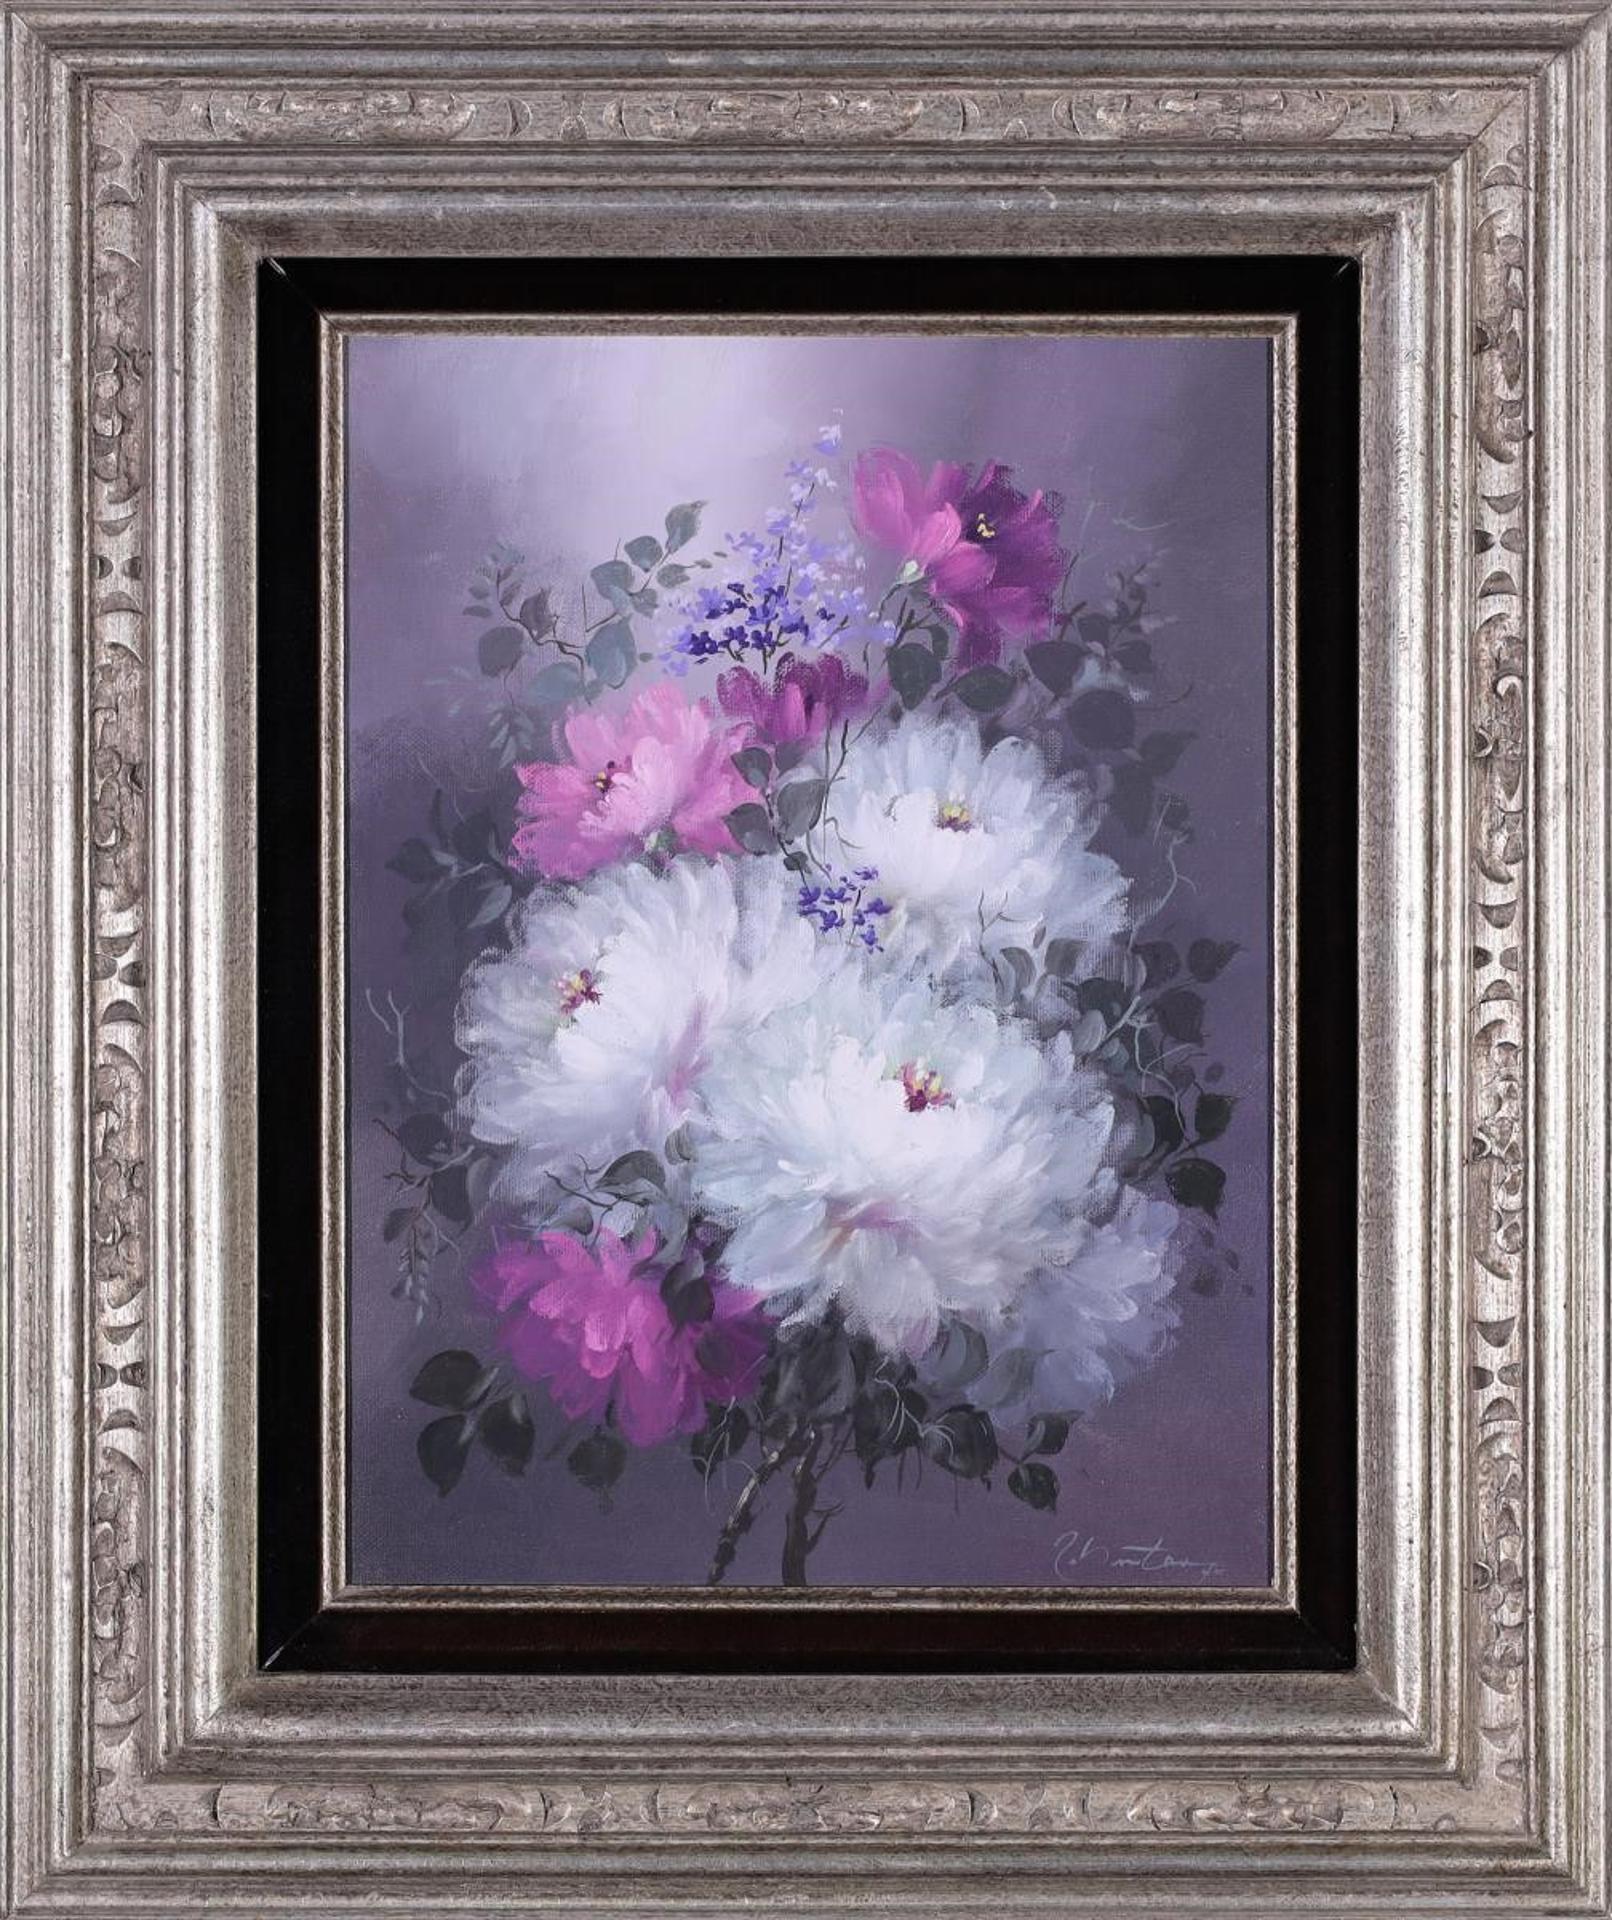 Victor Santos (1934-2003) - Untitled, Bouquet with Peonies